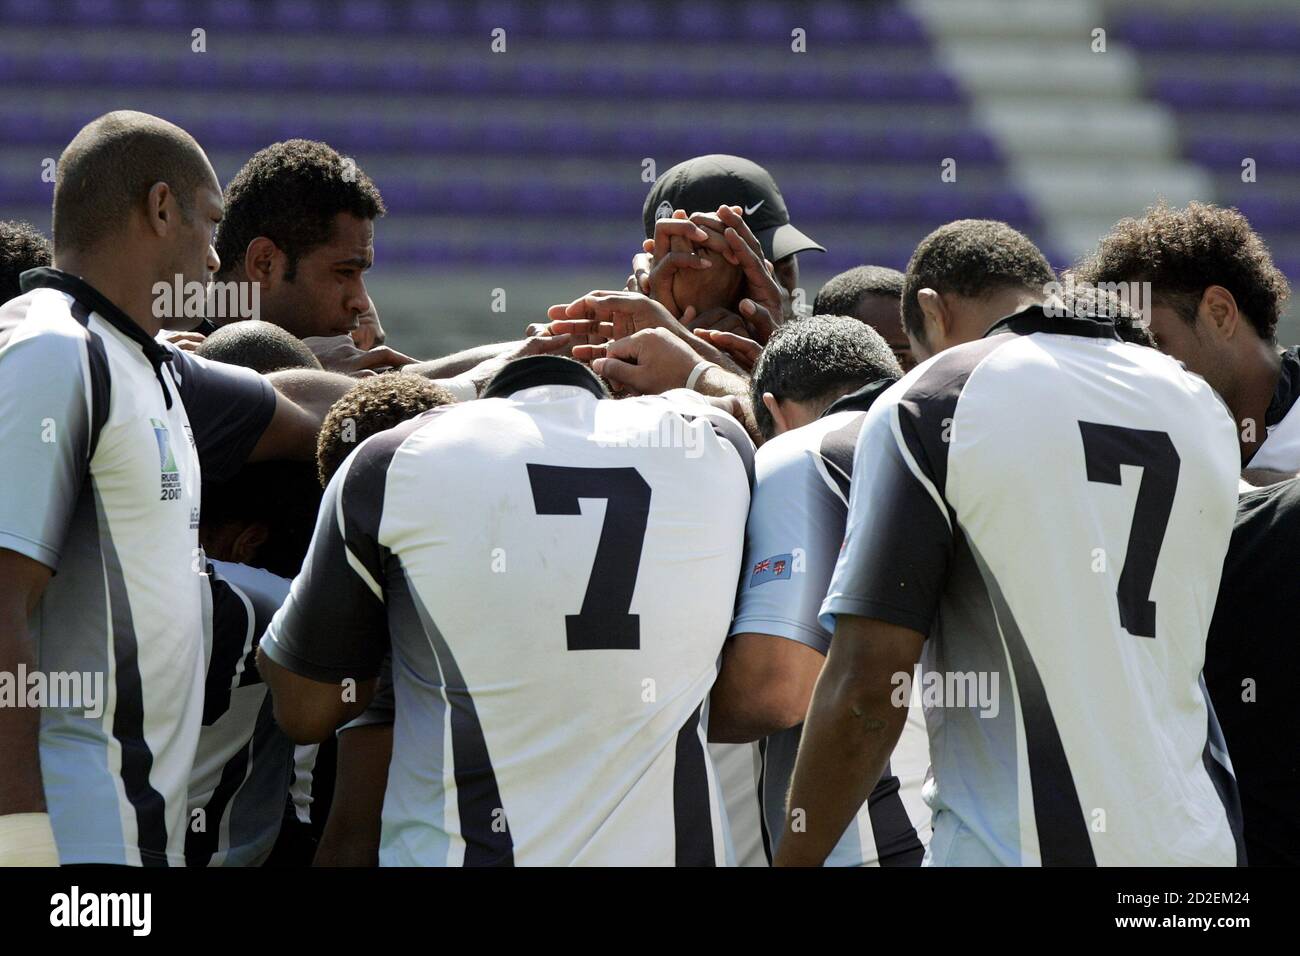 Fiji's rugby team players huddle before the Captain's Run rugby training session in Toulouse, southwestern France, September 11, 2007. Fiji plays in Pool B with Australia, Wales,Japan and Canada in the Rugby World Cup 2007.   REUTERS/Jean-Philippe Arles (FRANCE) Stock Photo